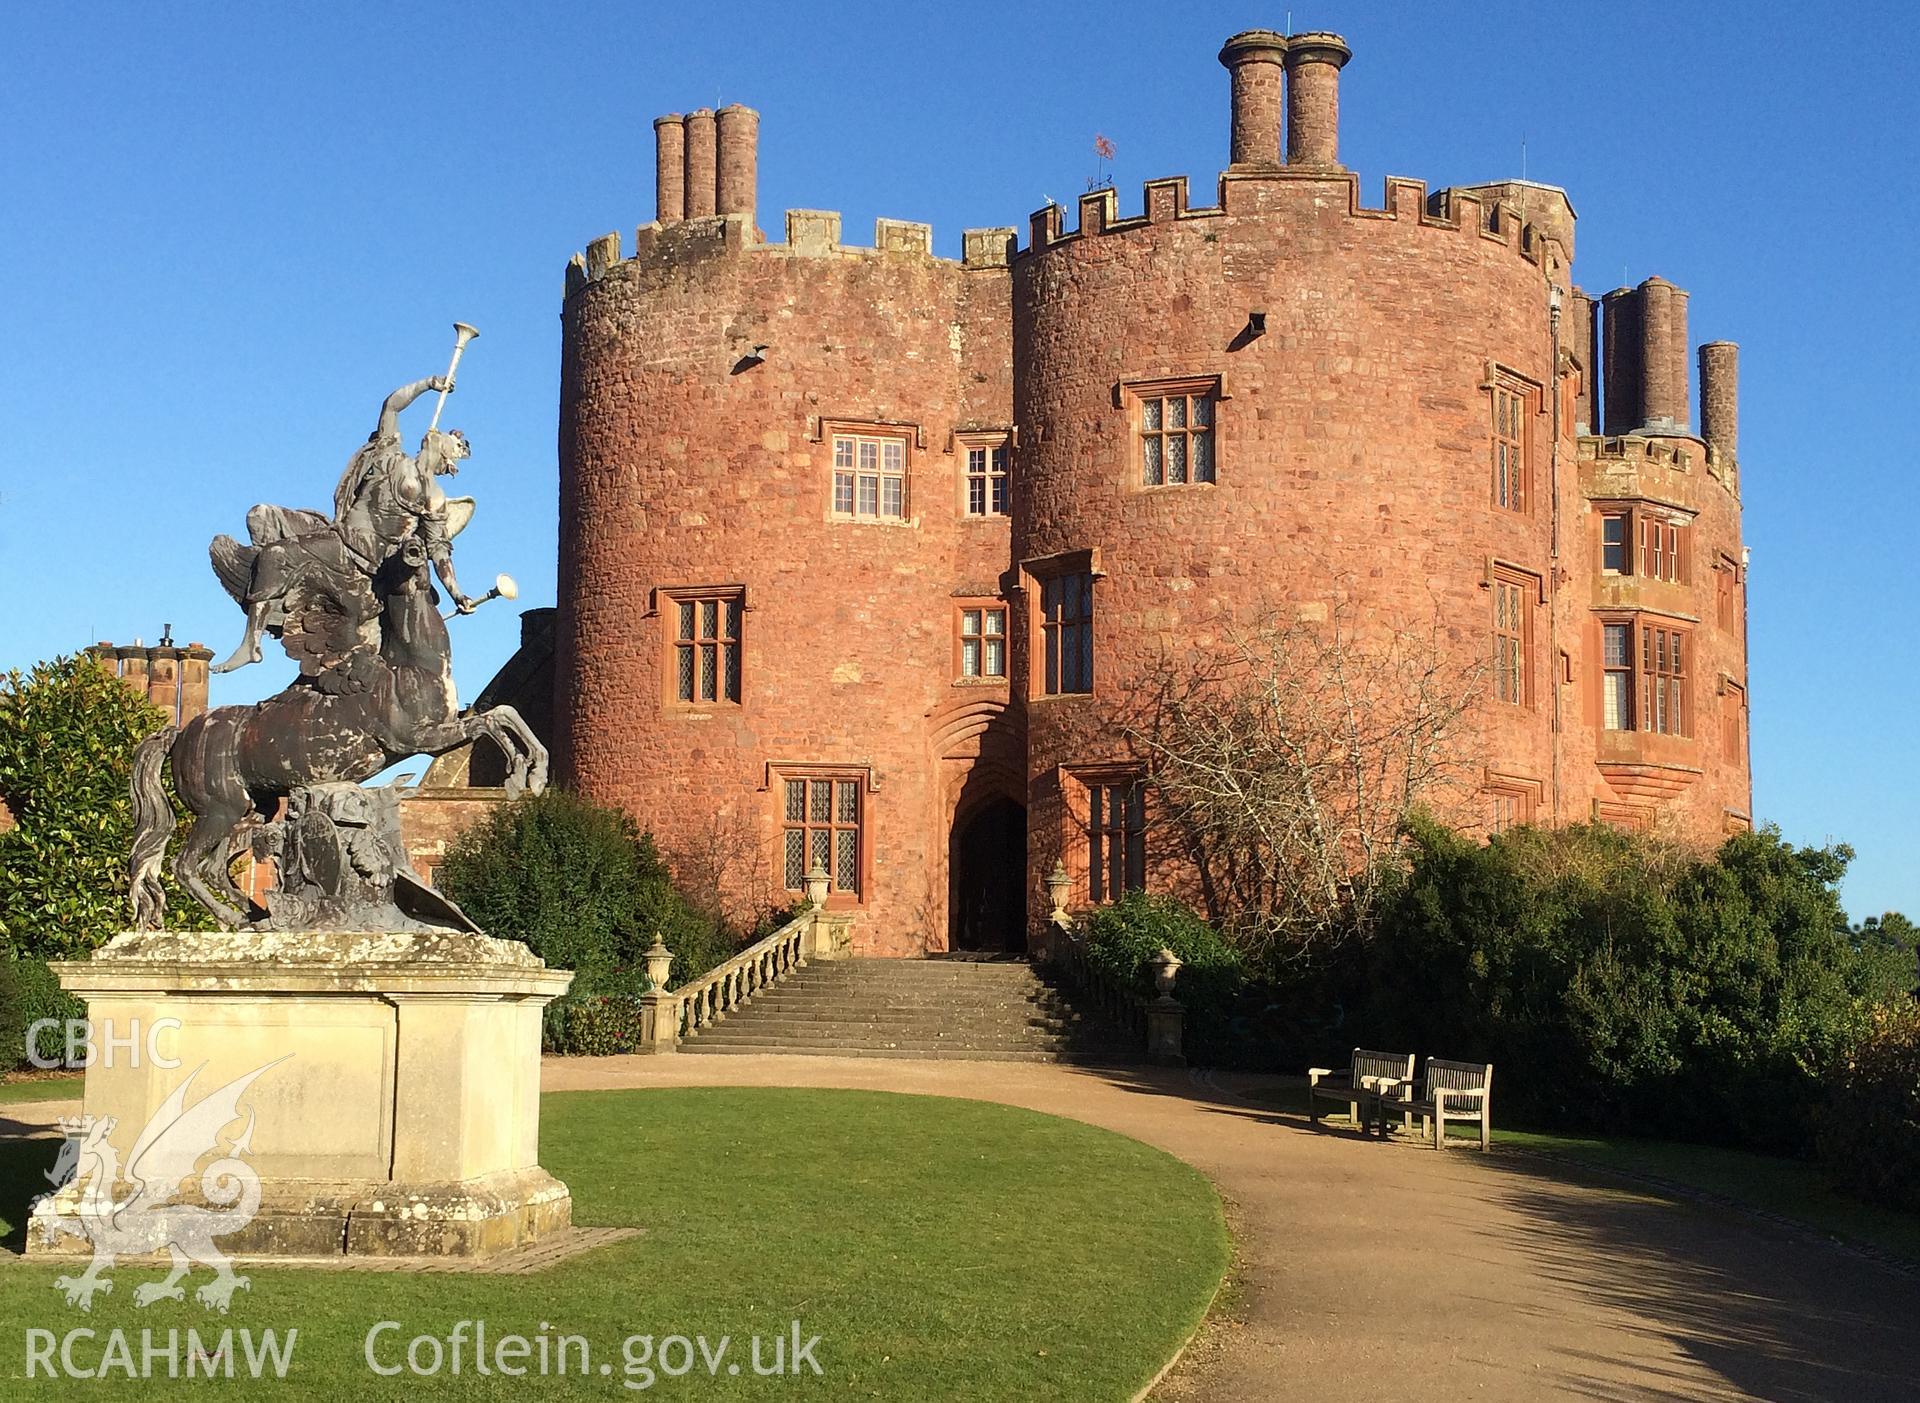 Colour photo showing Powys Castle, produced by Paul R. Davis,  2nd January 2017.